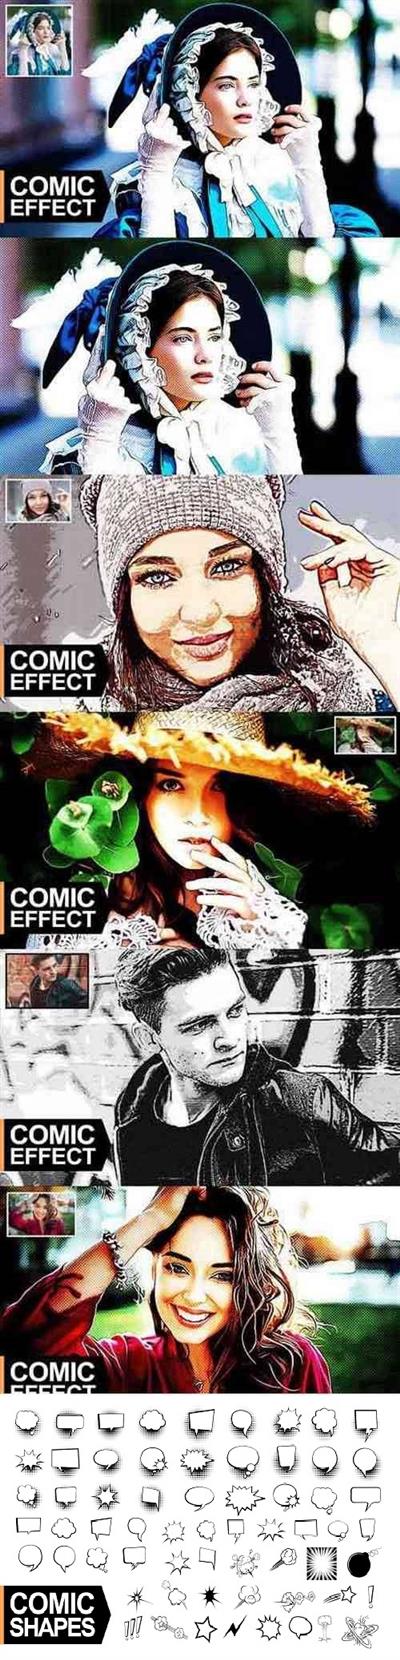 Comic Effect PS Action 3217043